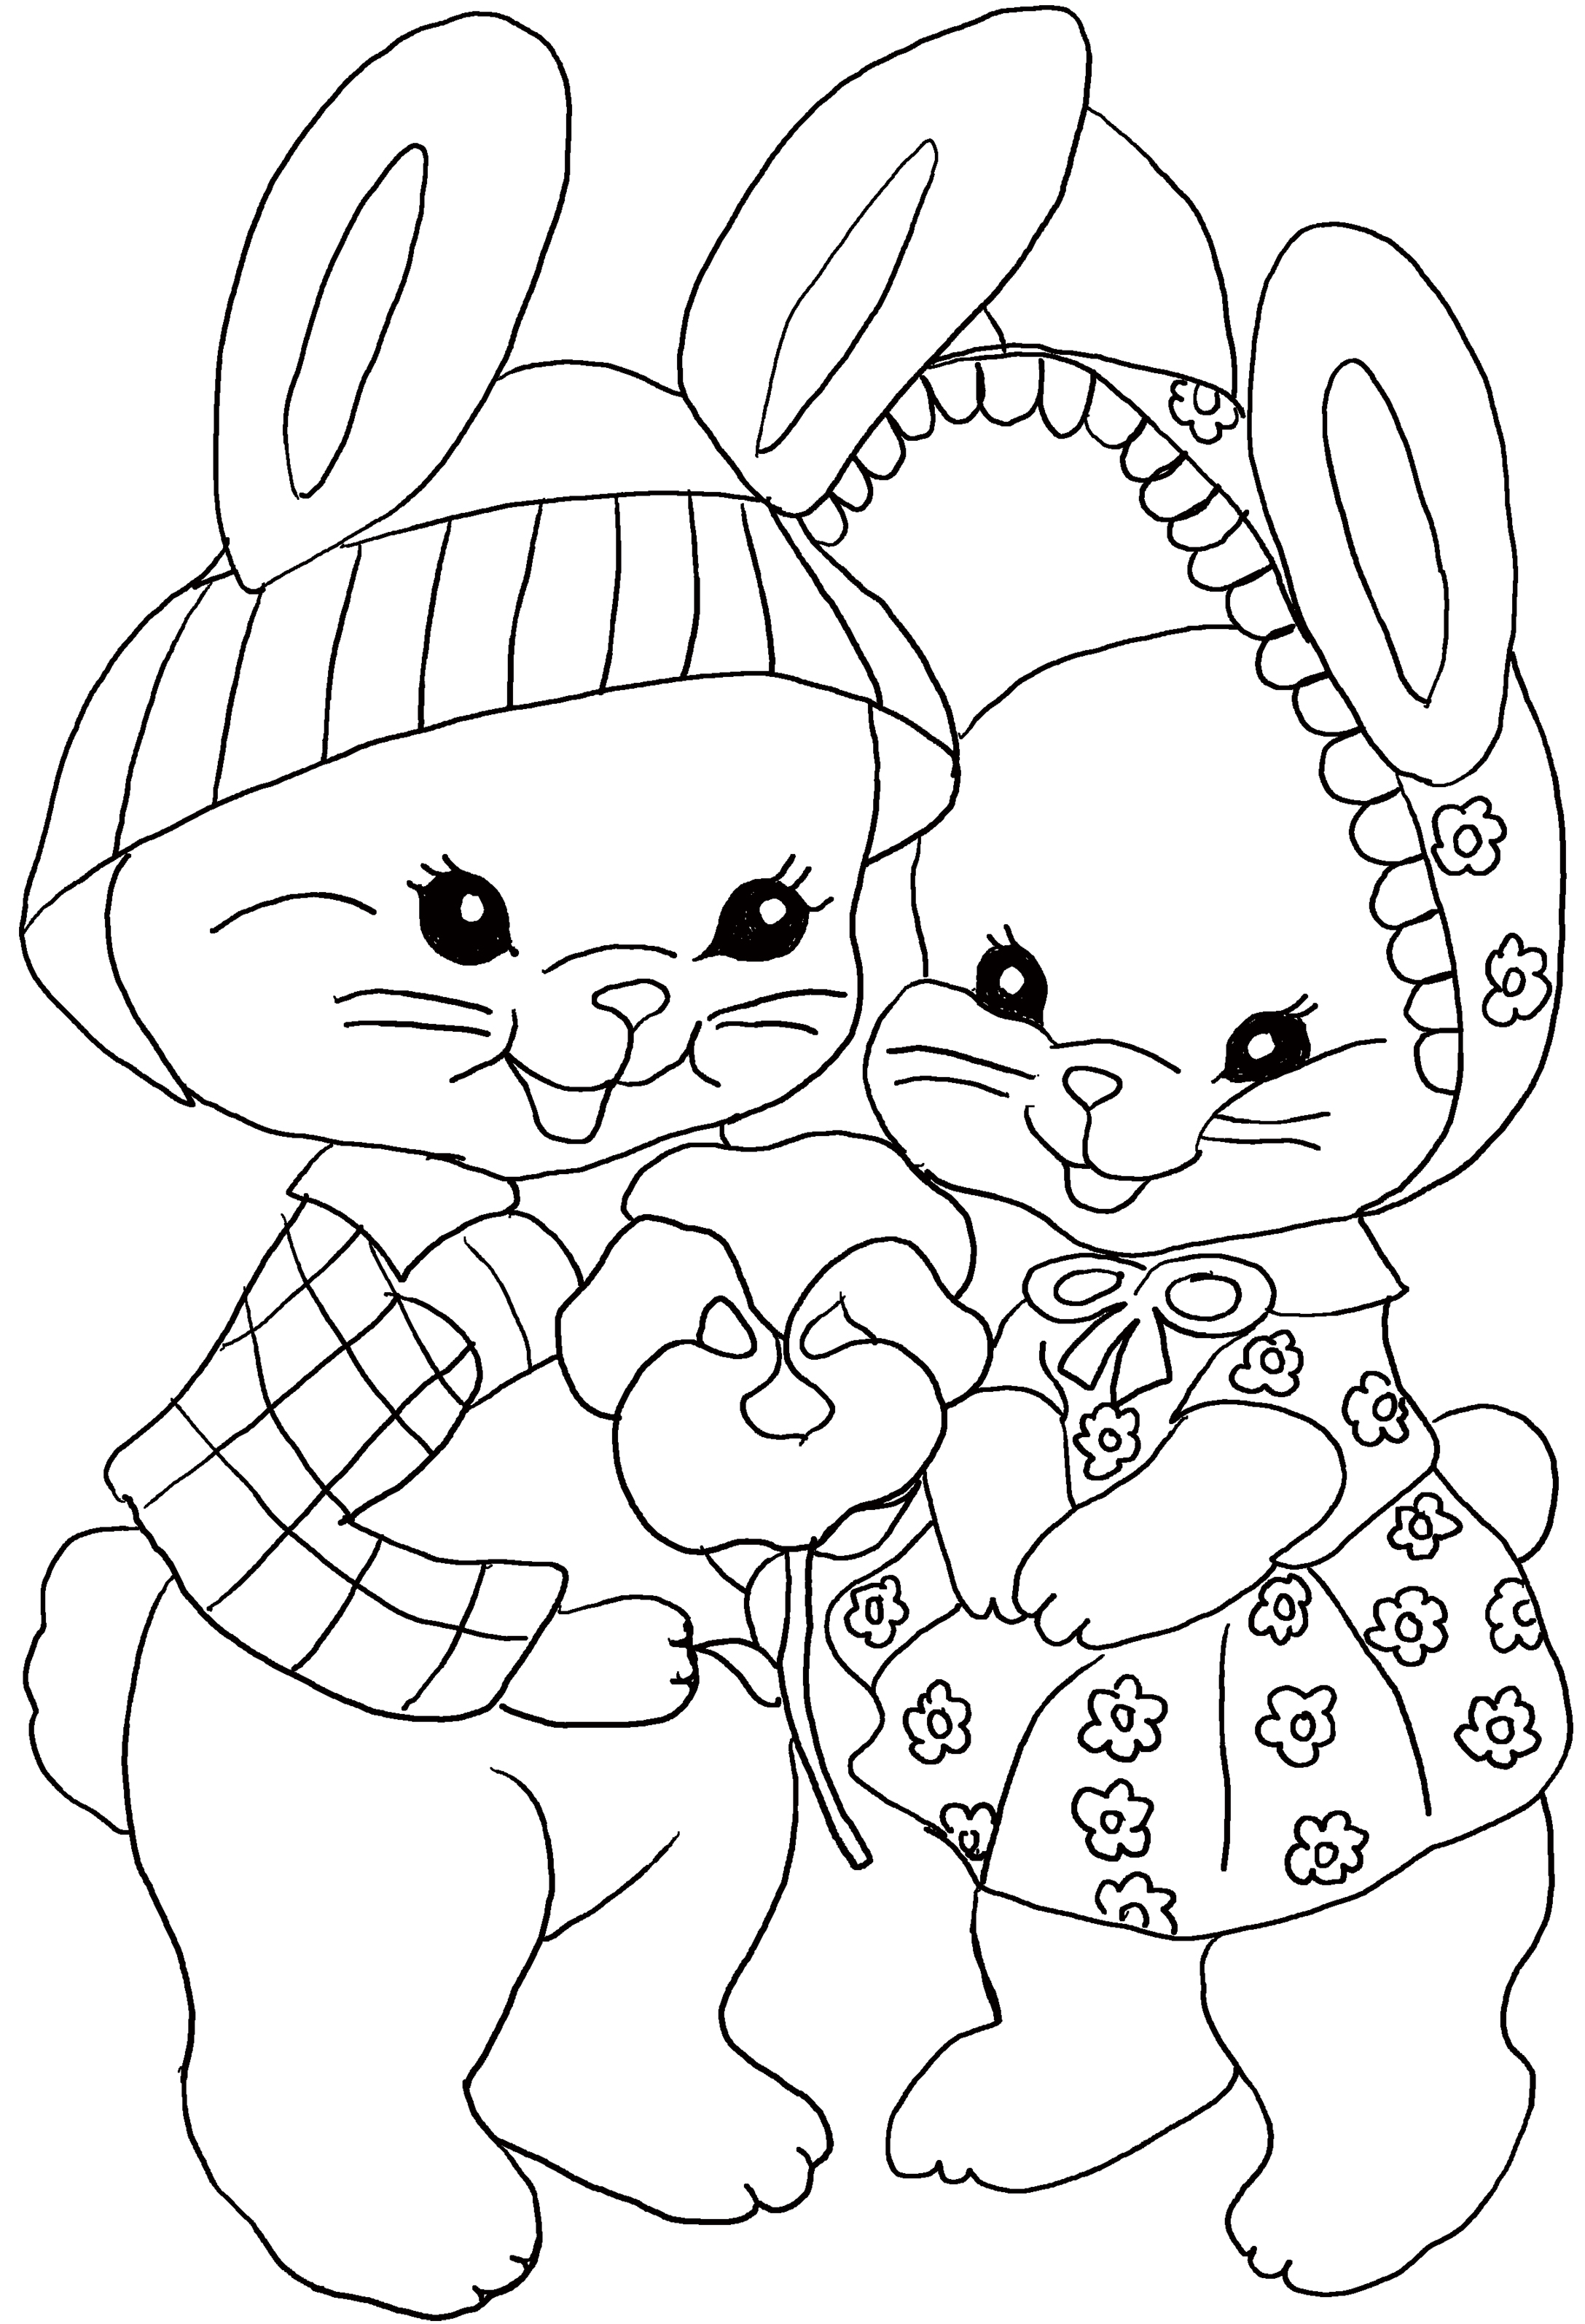 Easter coloring page for kids. Two cute bunnies with a flower